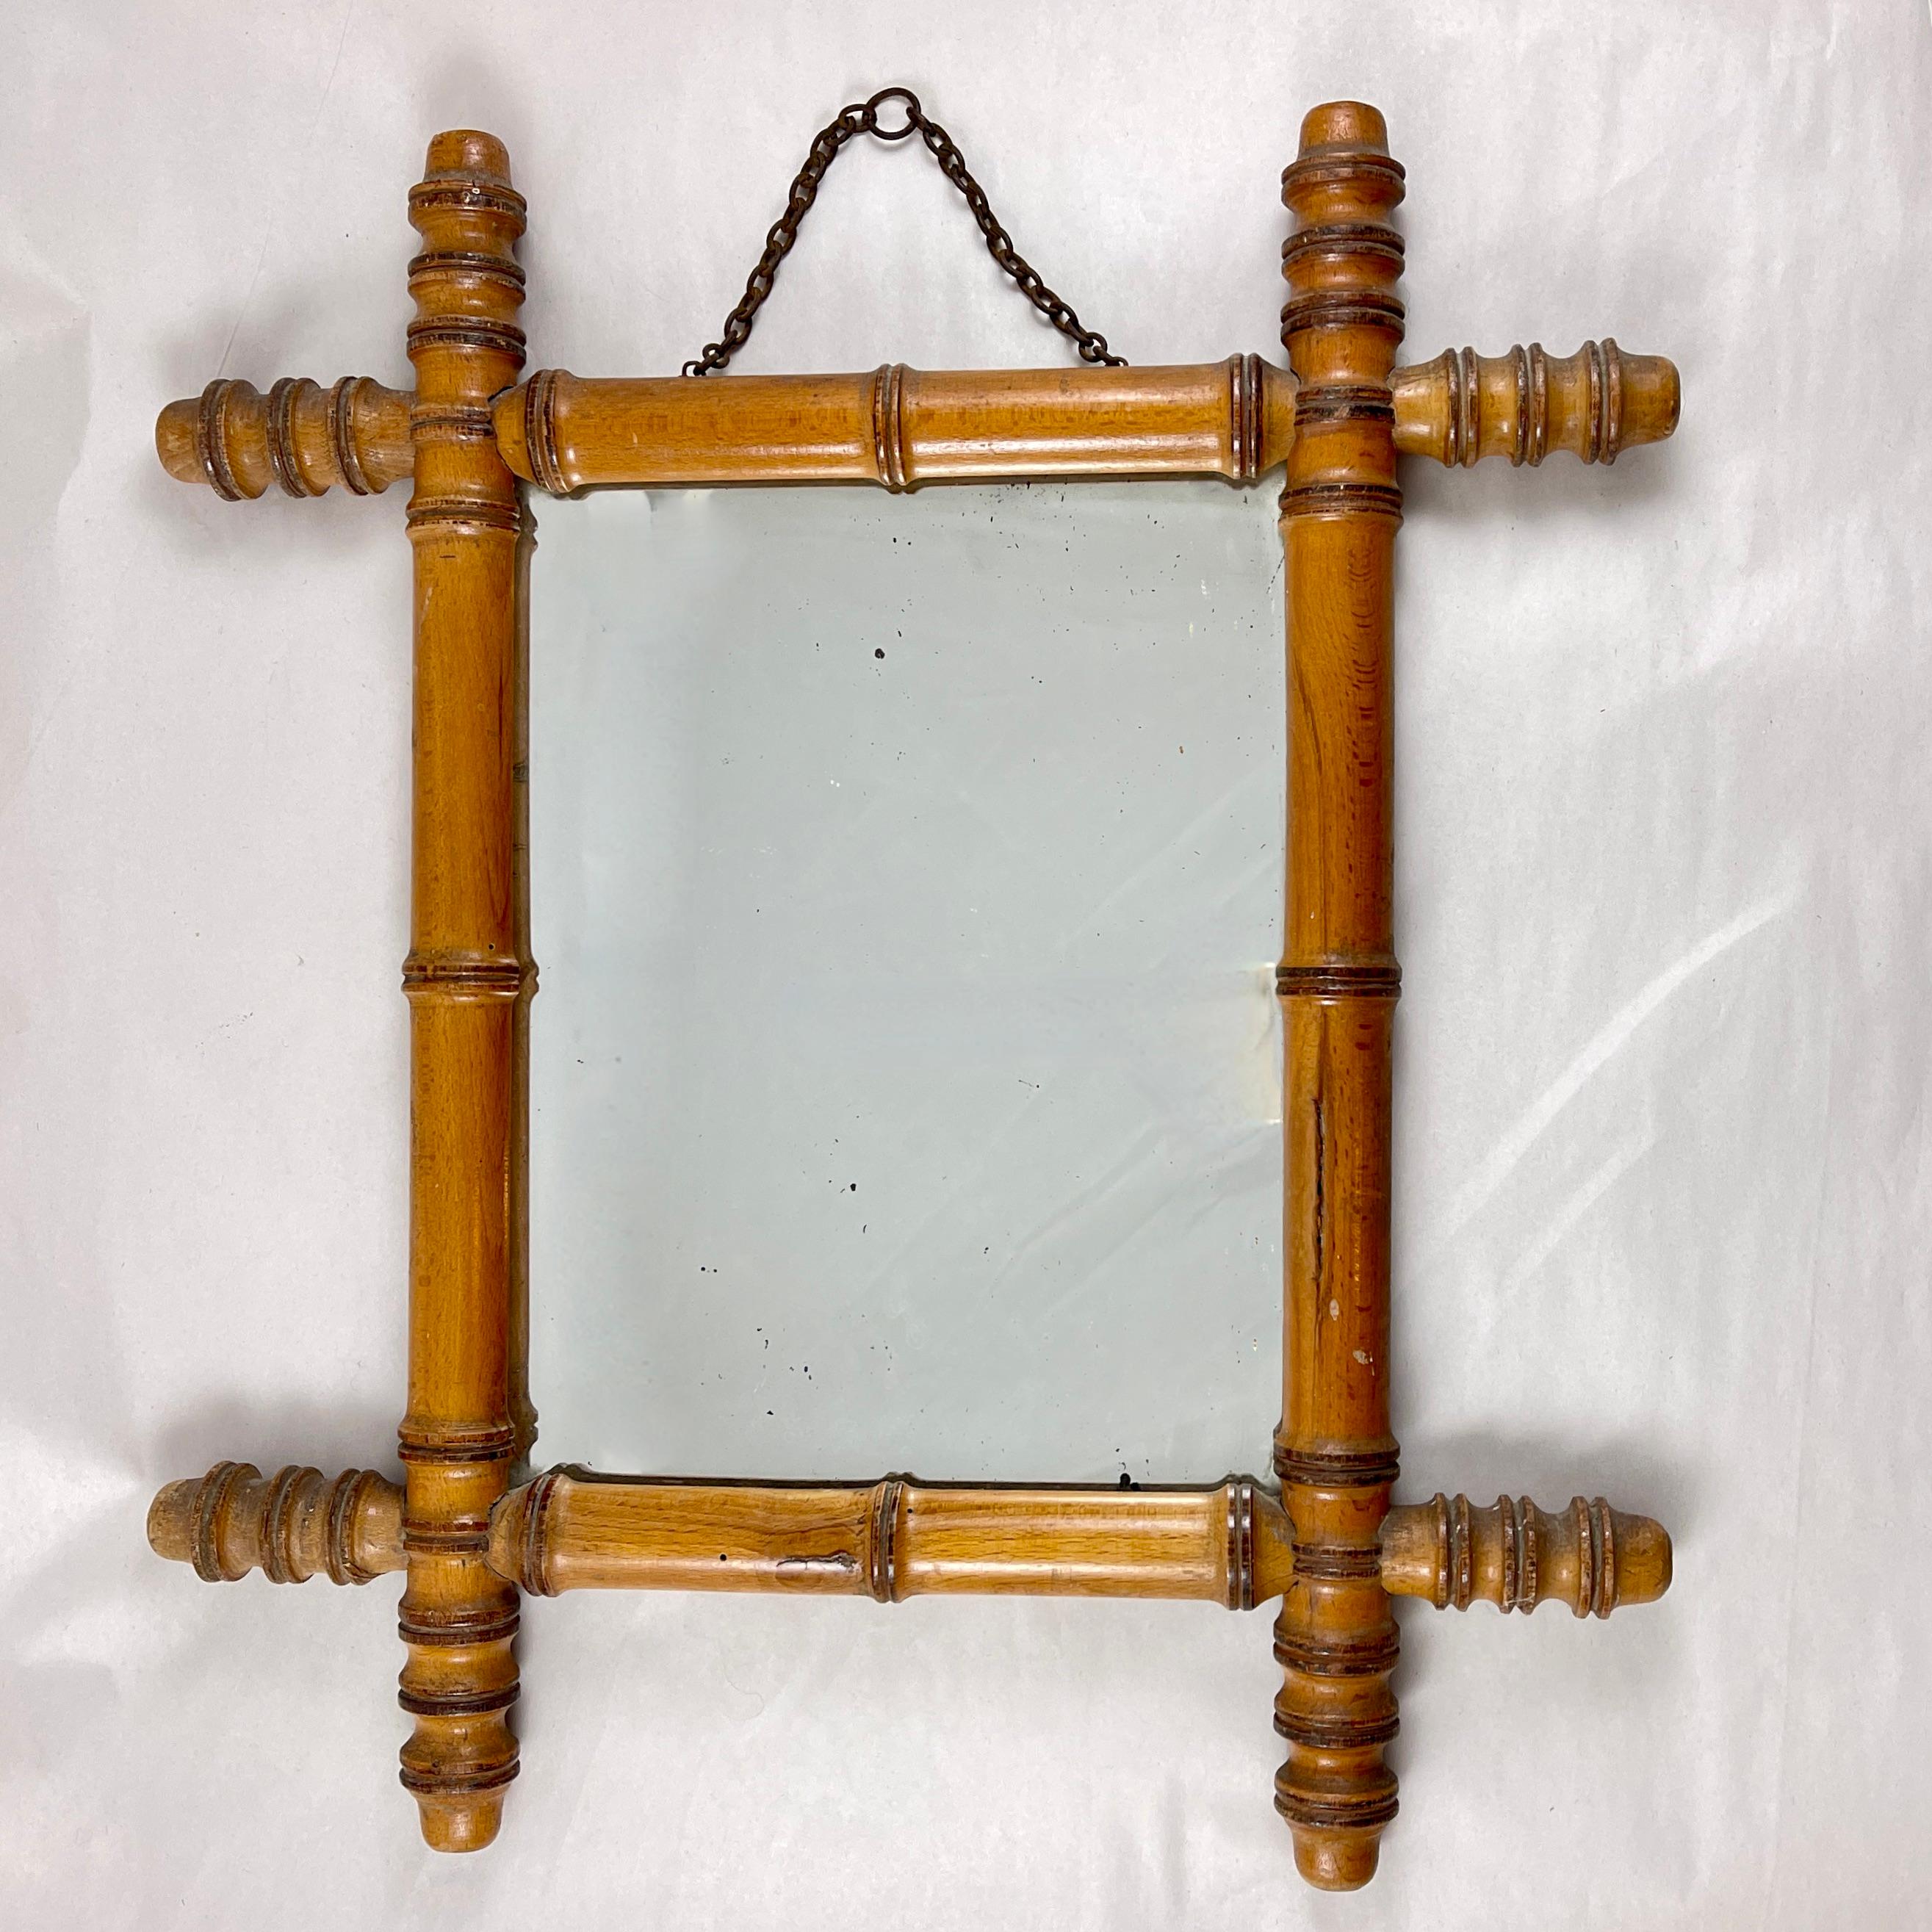 A faux bamboo wood framed mirror, France, circa 1920s.

In the Chinoiserie taste, a hard-wood frame formed to resemble bamboo. With the original mirror and metal hanging chain. Backed with the original thin sheet of wood as well. Heavy.

Most often